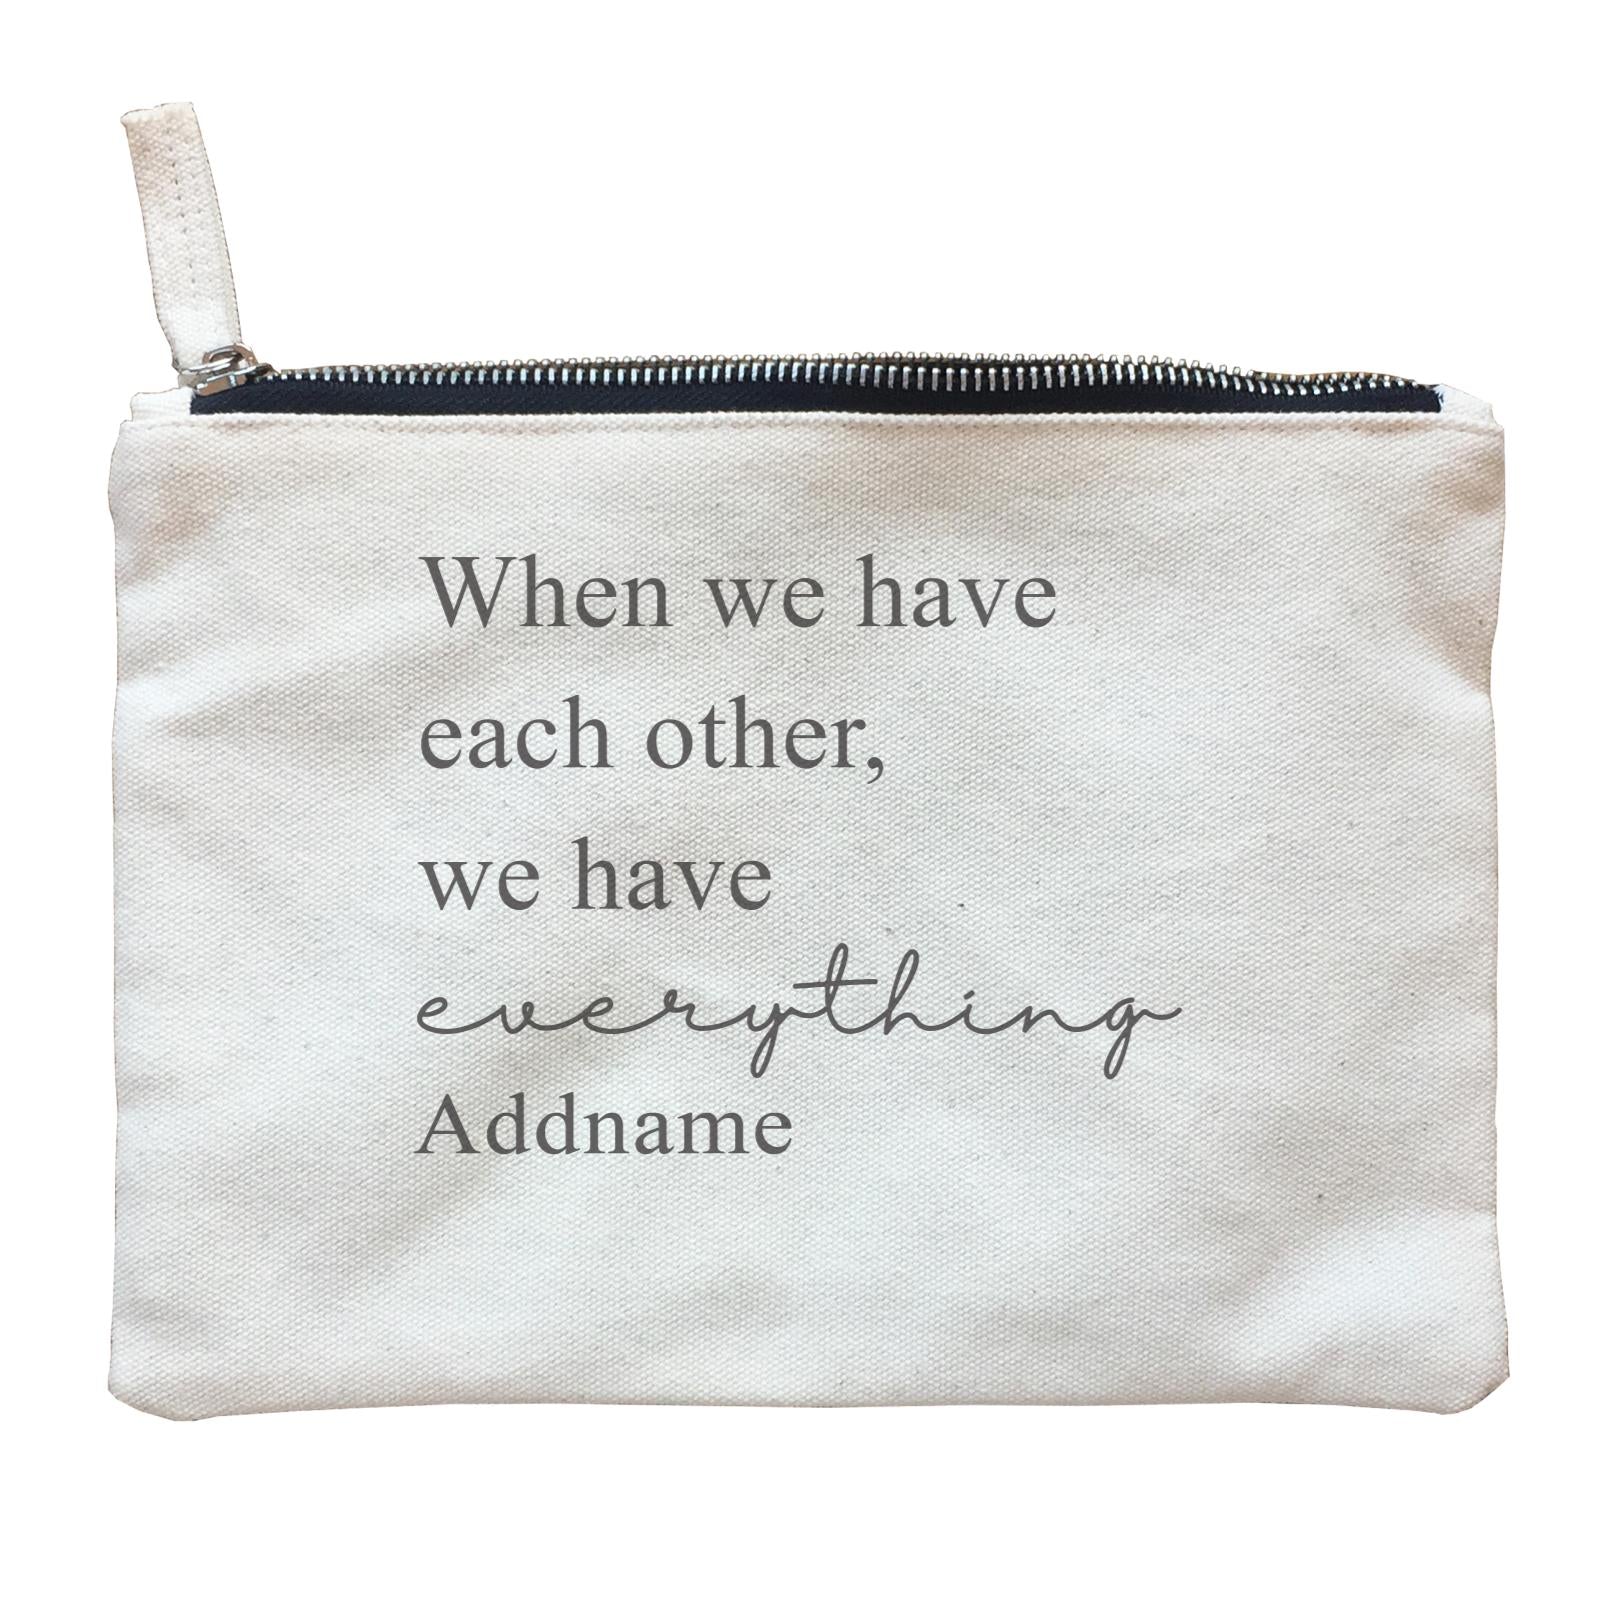 Family Is Everythings Quotes When We Have Each Other,We Have Everthing Addname Zipper Pouch